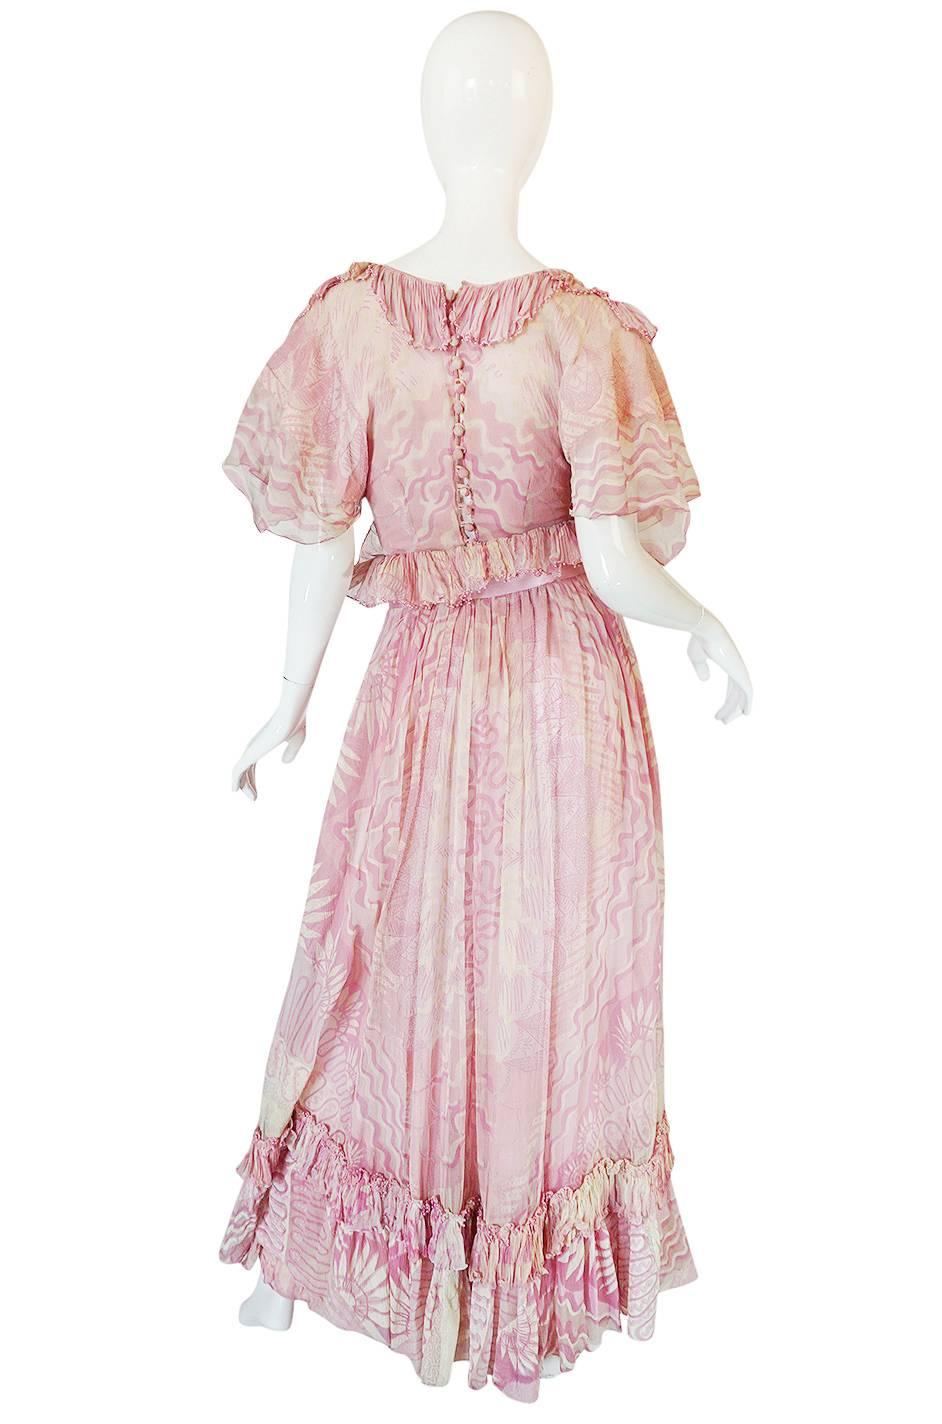 

This rare and amazing hand painted silk gown set by Zandra Rhodes in a very rare piece from one of her most coveted of all her collections - The Lily collection from 1974. It is constructed of a fine, pale pink, silk chiffon that is entirely